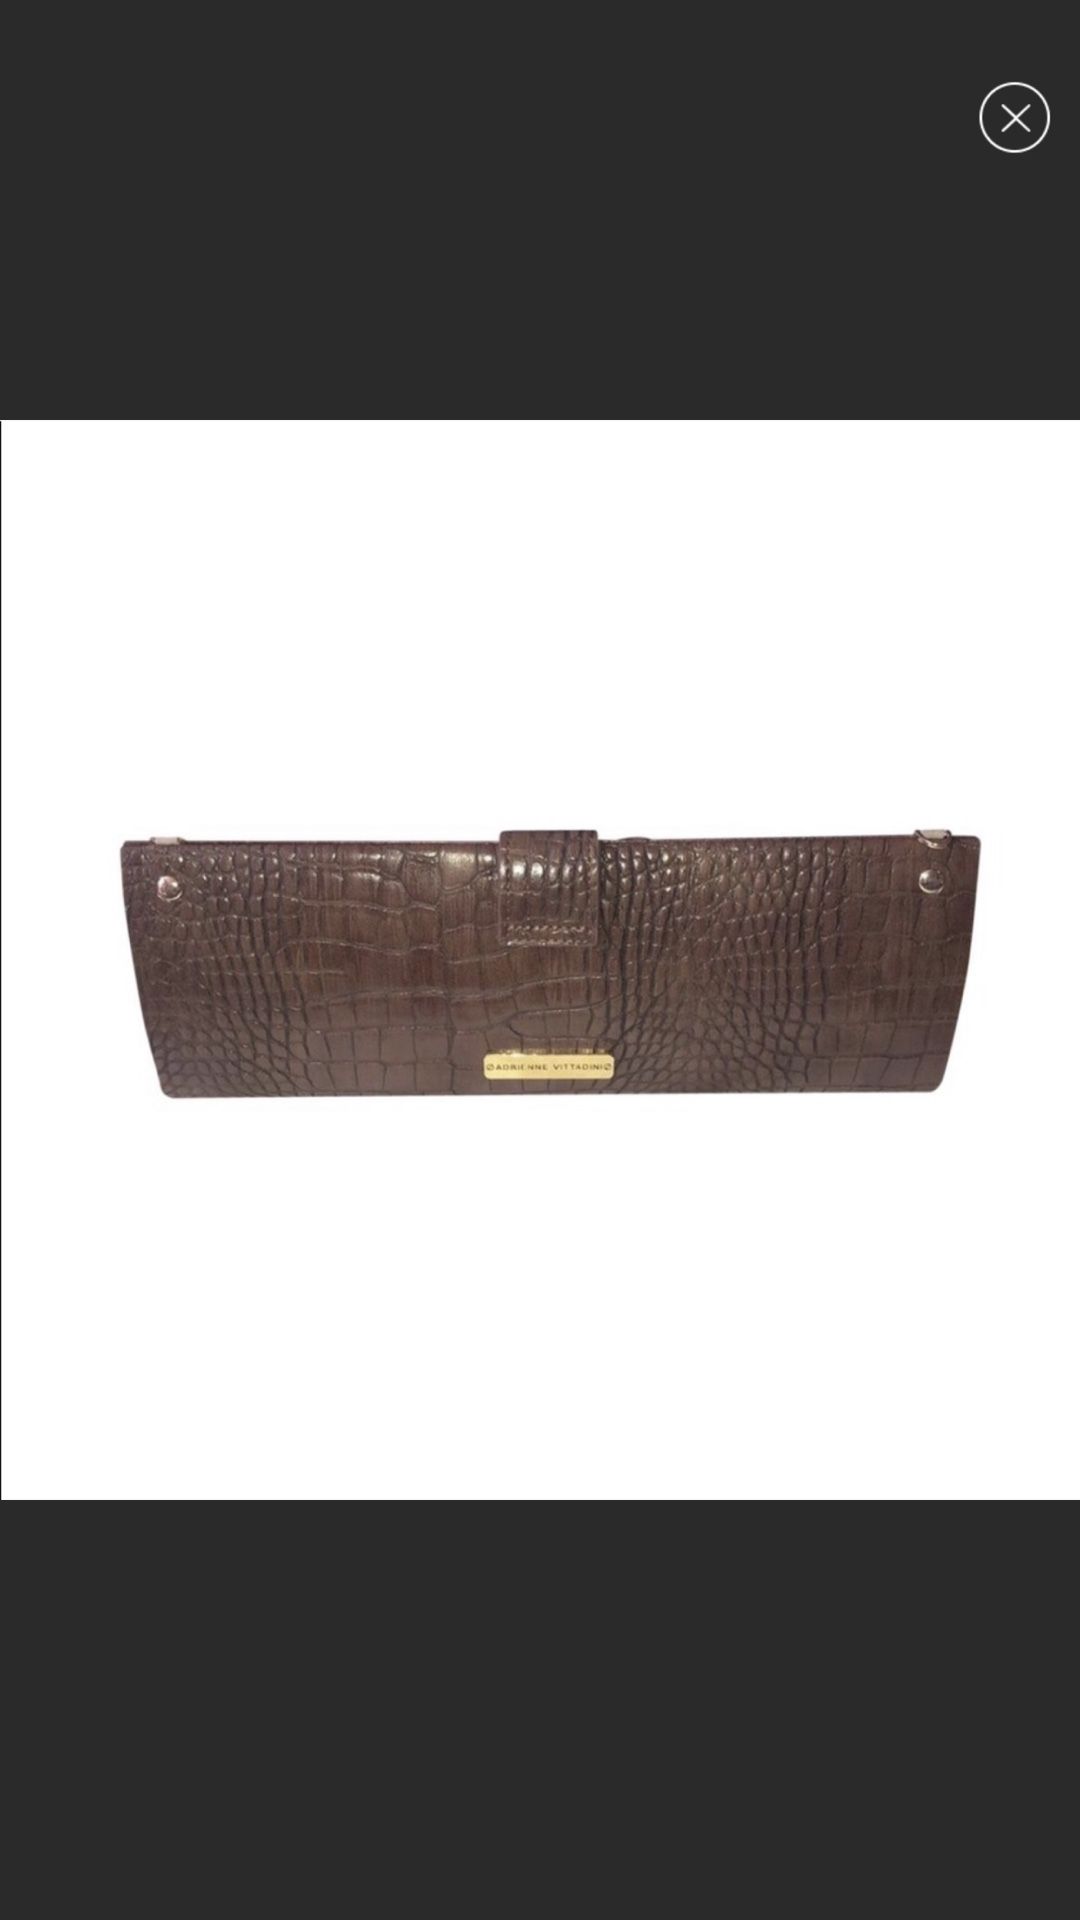 Adrienne Vittadini brown snake leather clutch